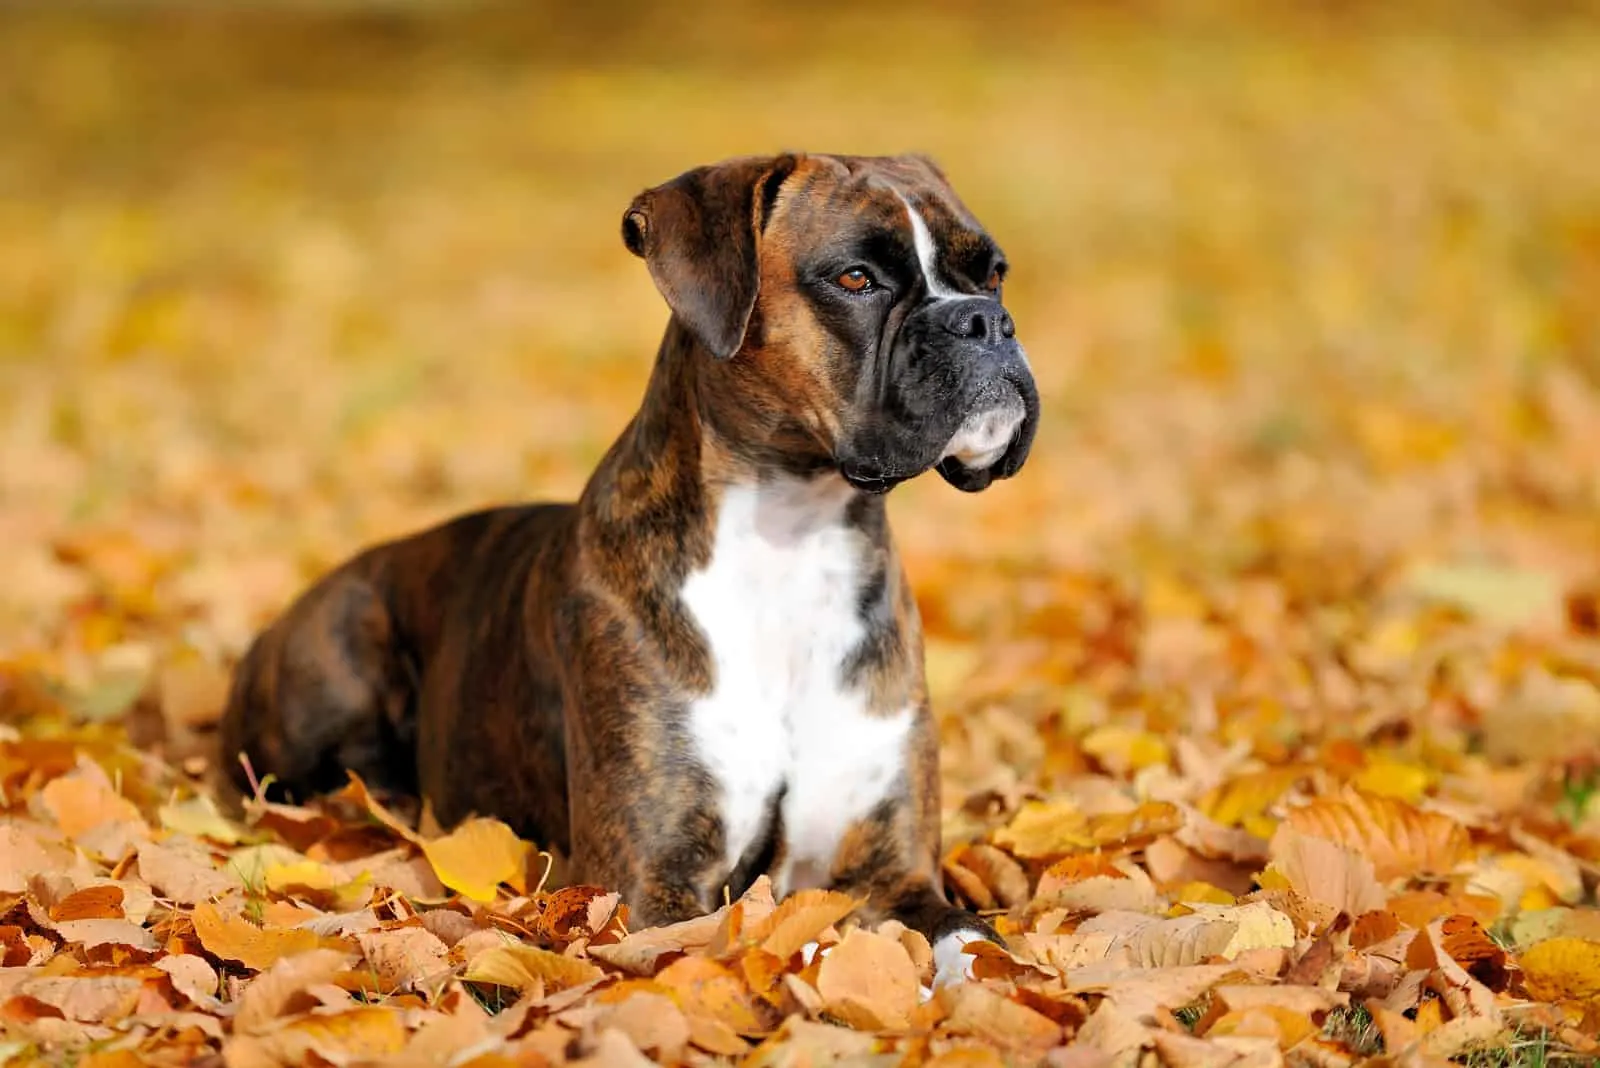 boxer dog lying on the leaves outdoors